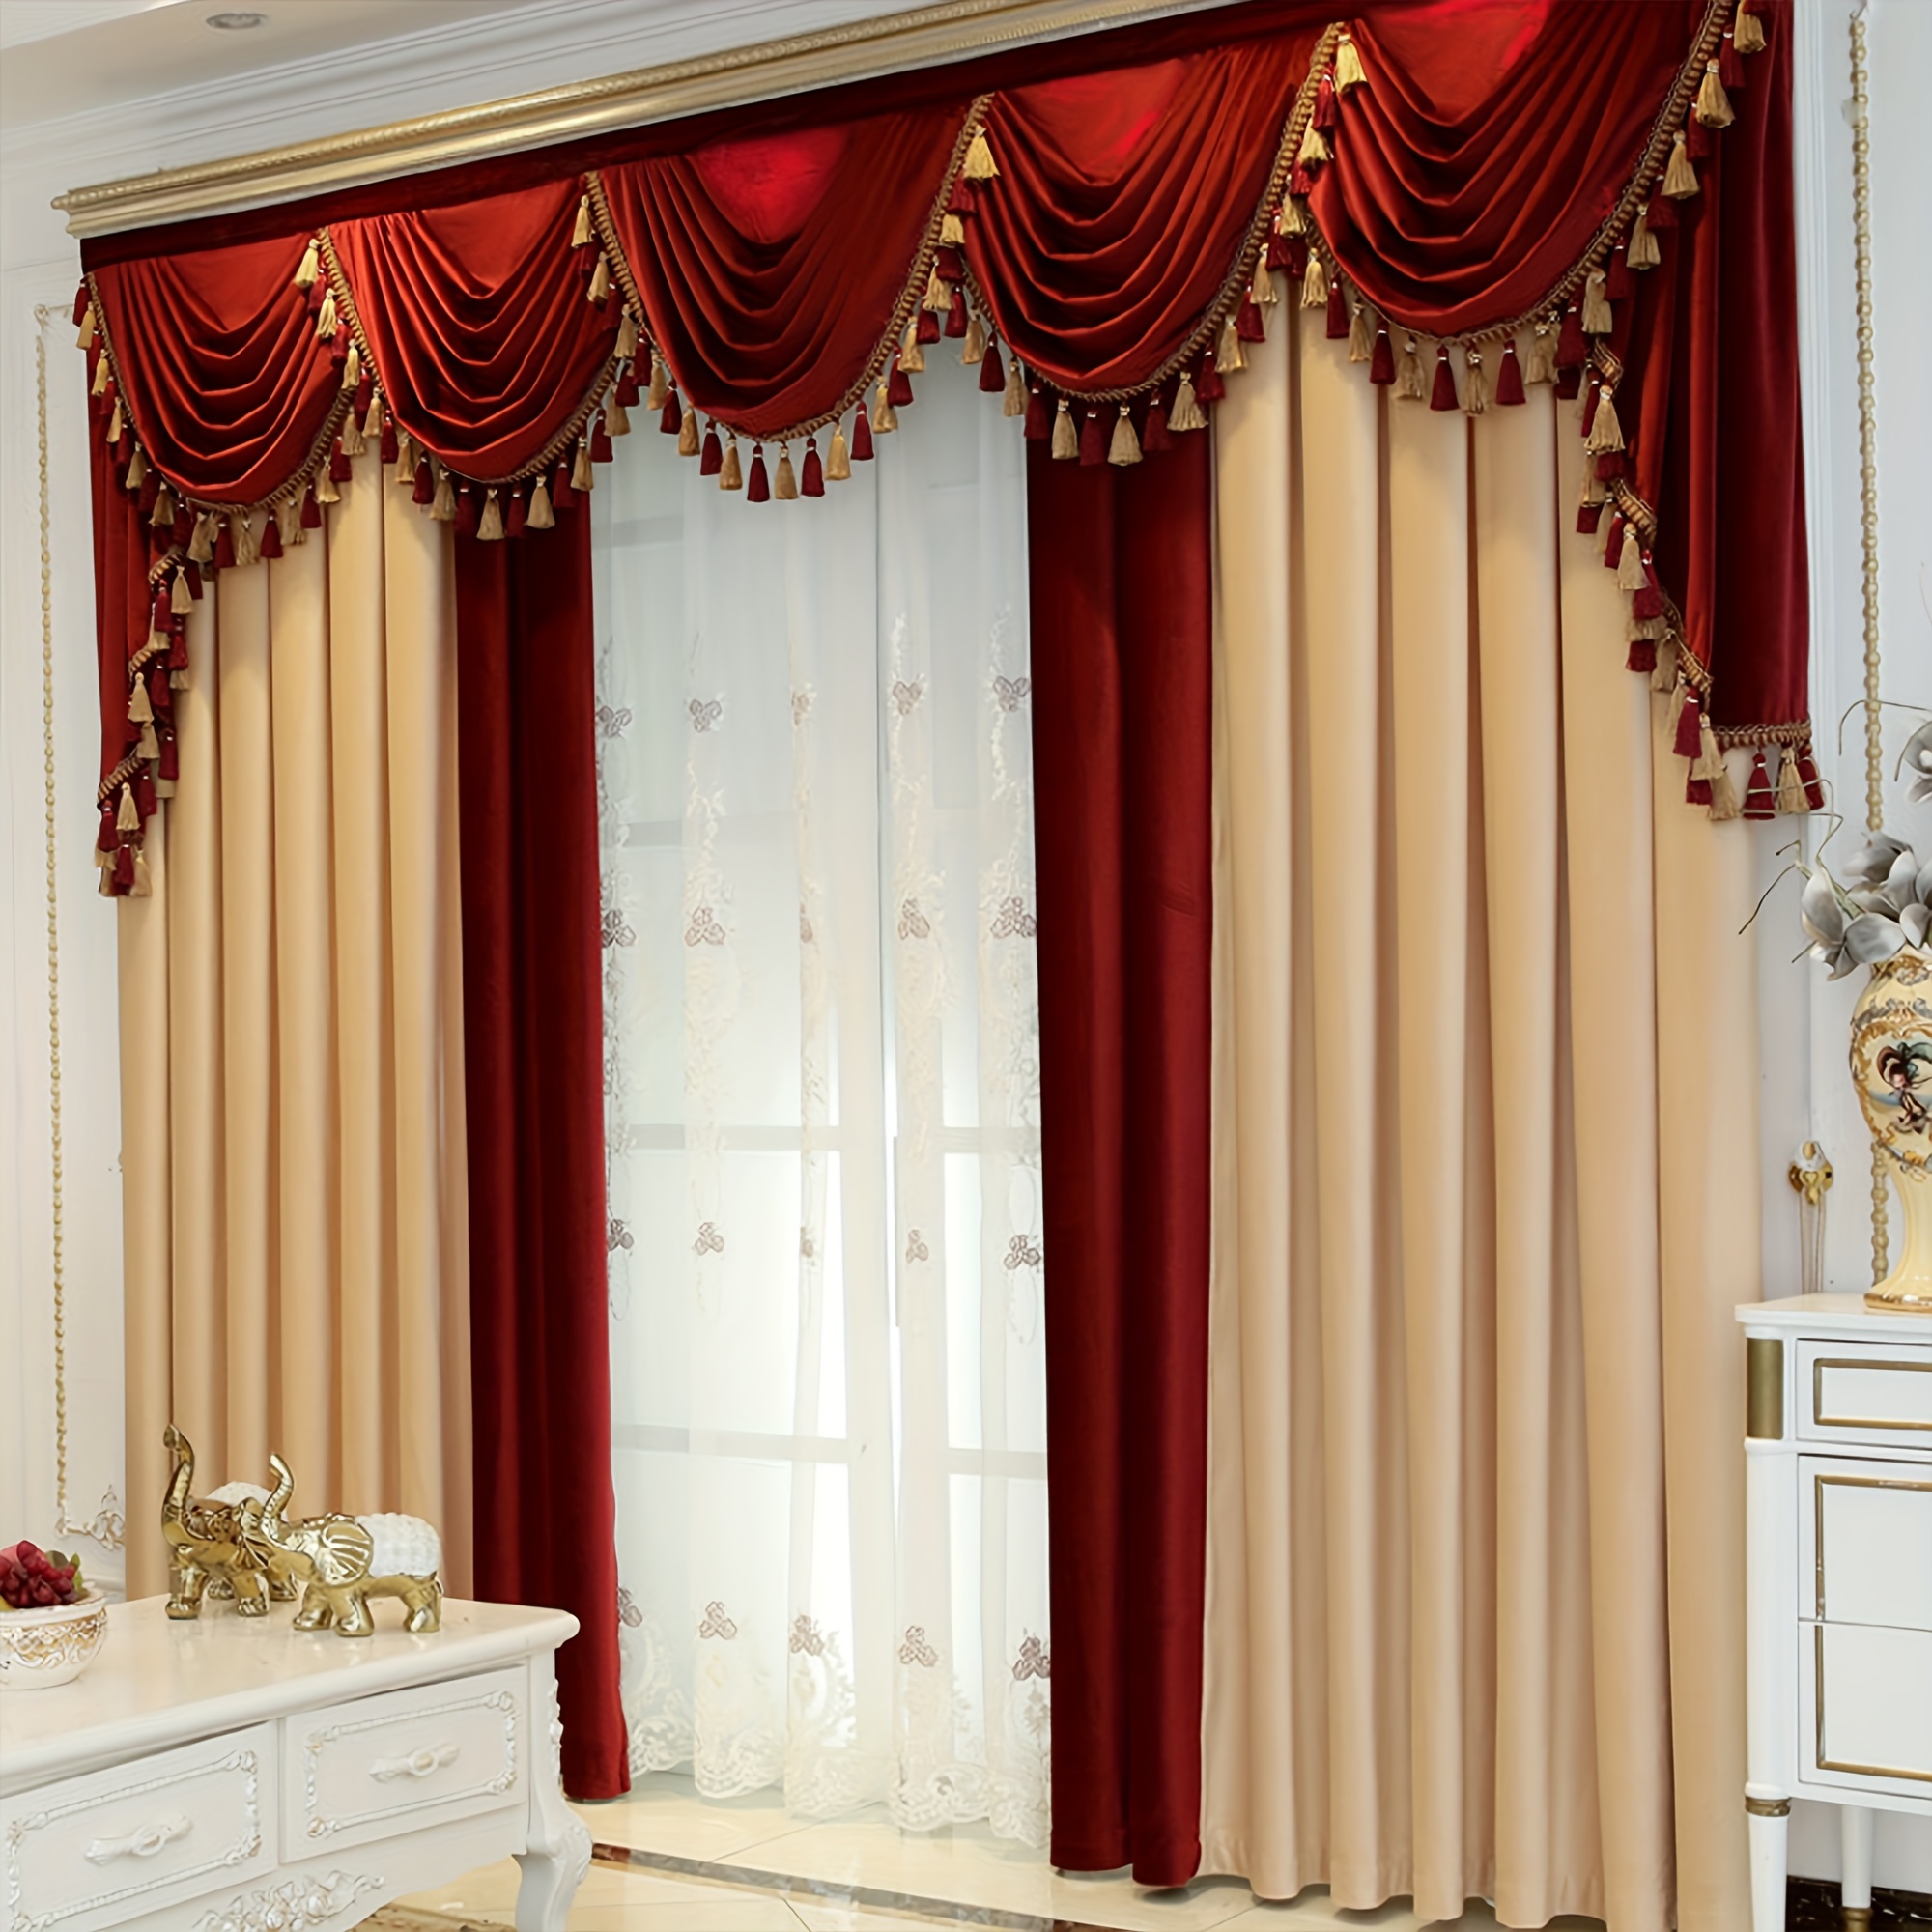 

2pcs Thick Velvet Red Beige Color Blocking Blackout Curtains For Bedroom And Living Room, Wedding Room Home Decor